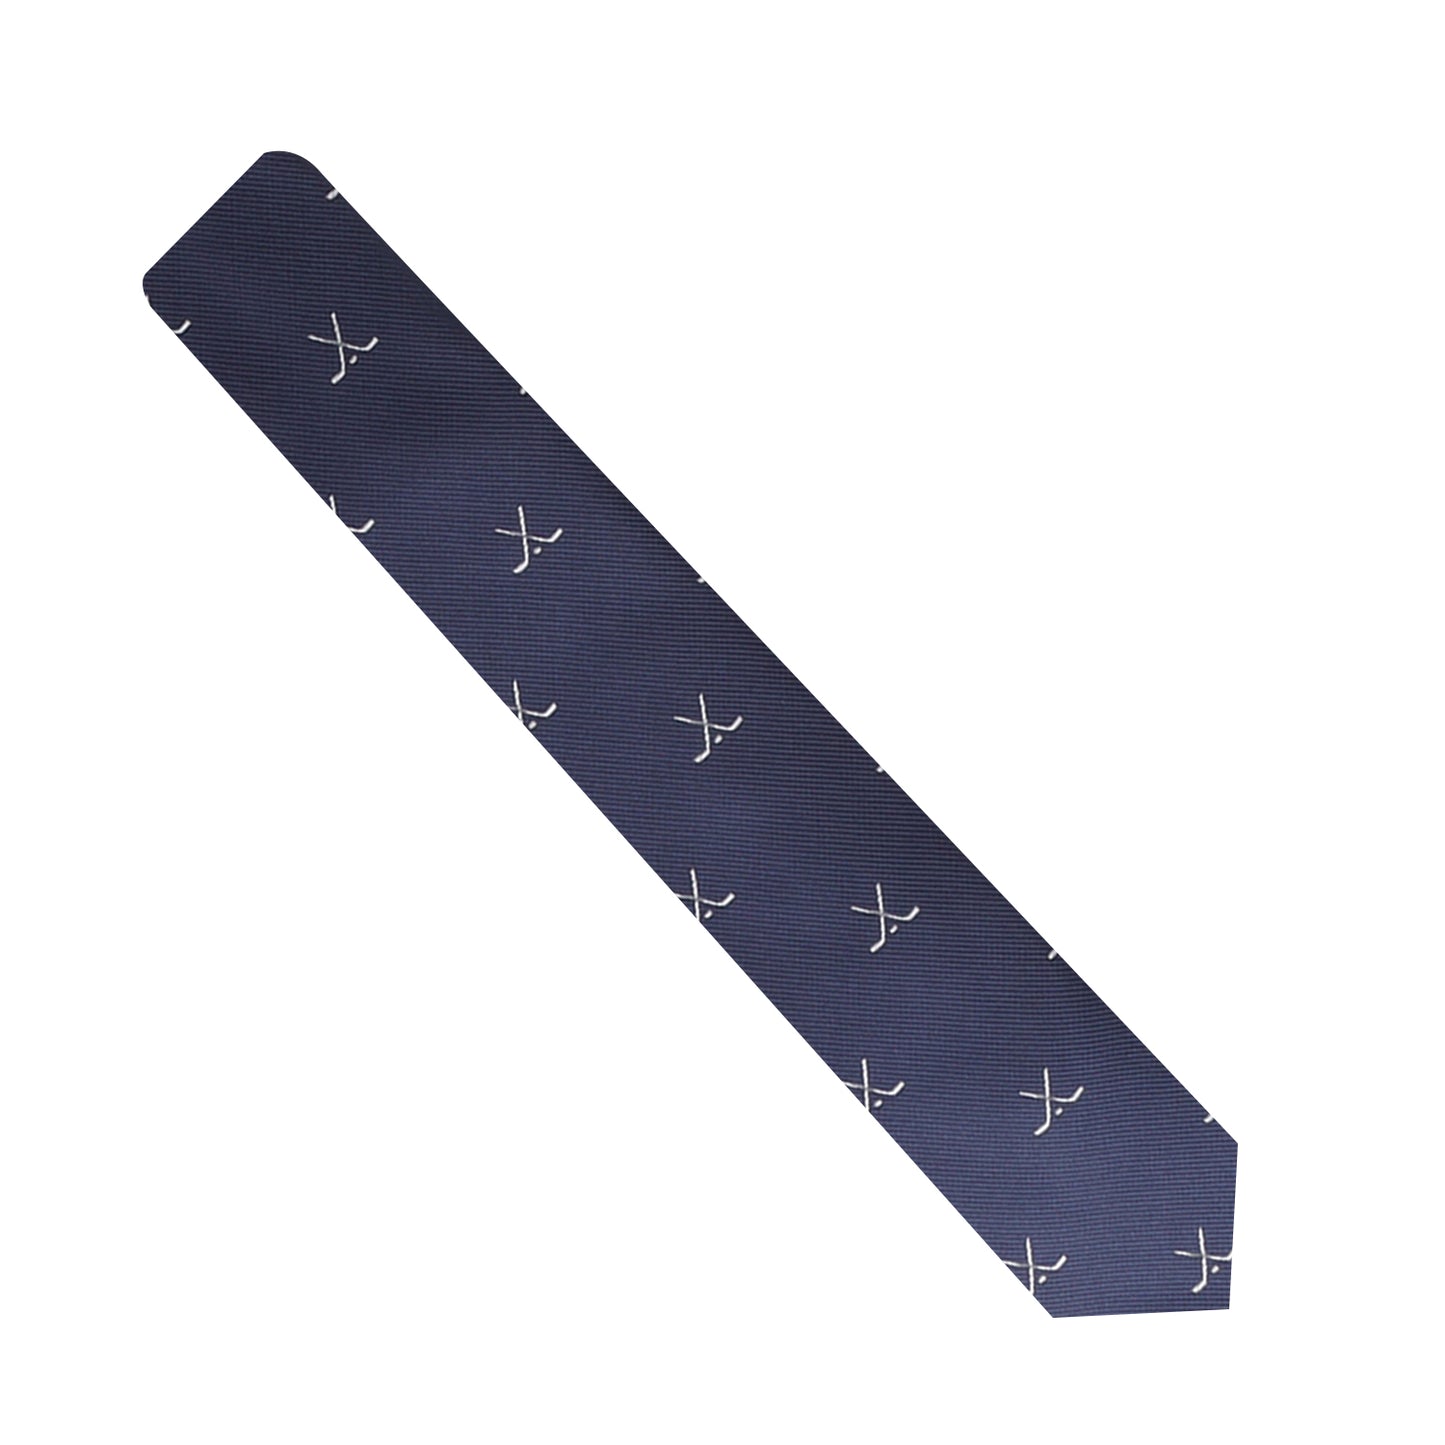 A stylish Crossed Ice Hockey Skinny Tie in blue, earning you some style points.